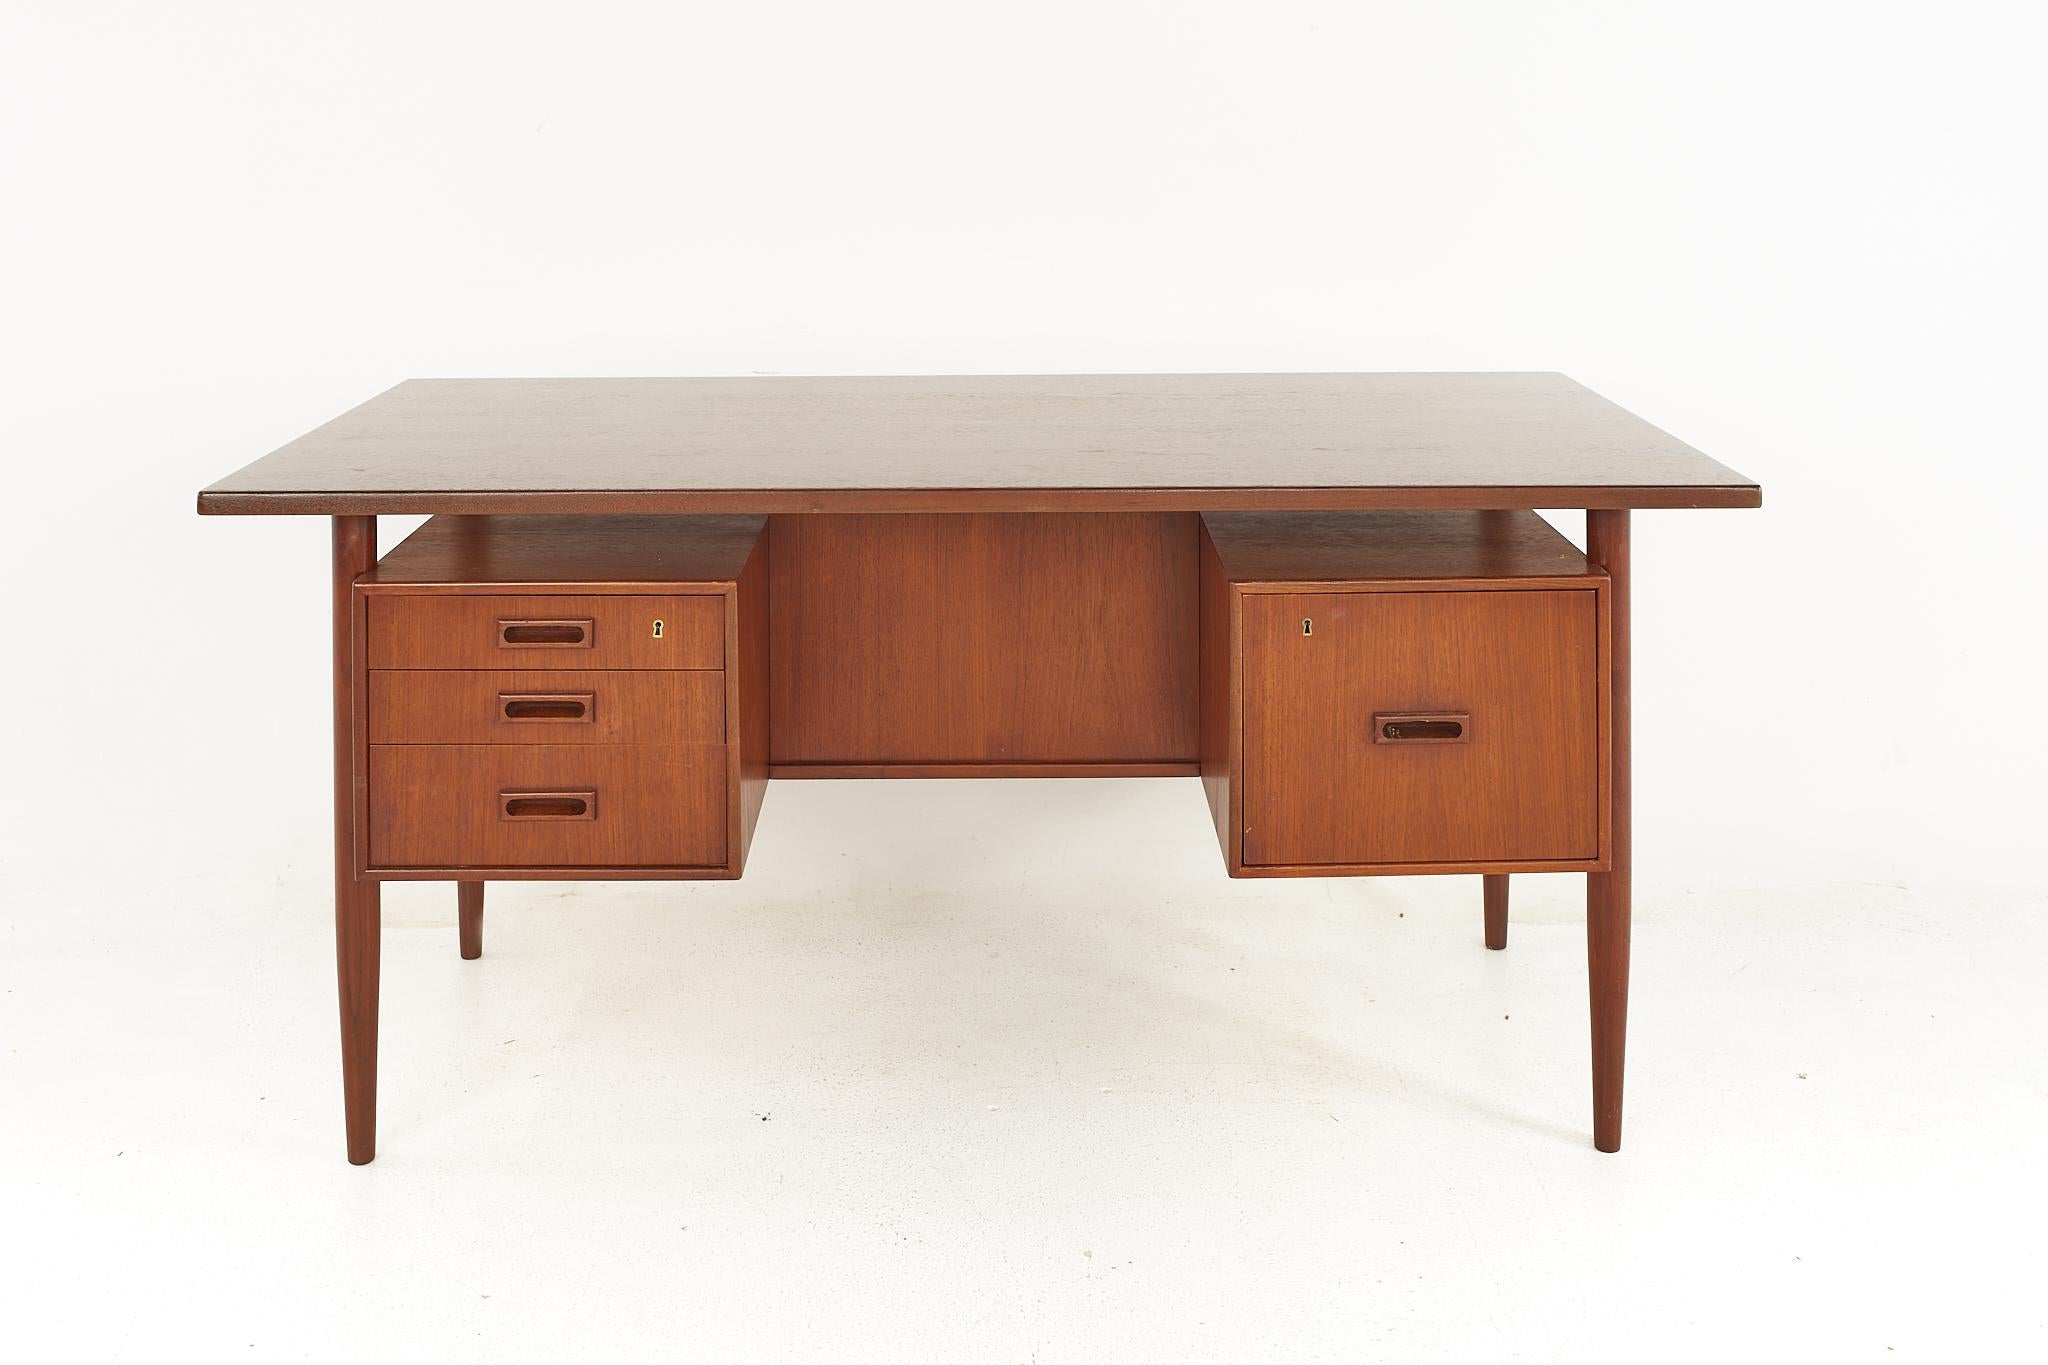 HP Hansen Mid Century Danish Teak Desk

The desk measures: 62.5 wide x 31.5 deep x 29.5 inches high, with a chair clearance of 27.75 inches

Please Note: The second set of photos you see for this piece are what it looked like BEFORE our restoration